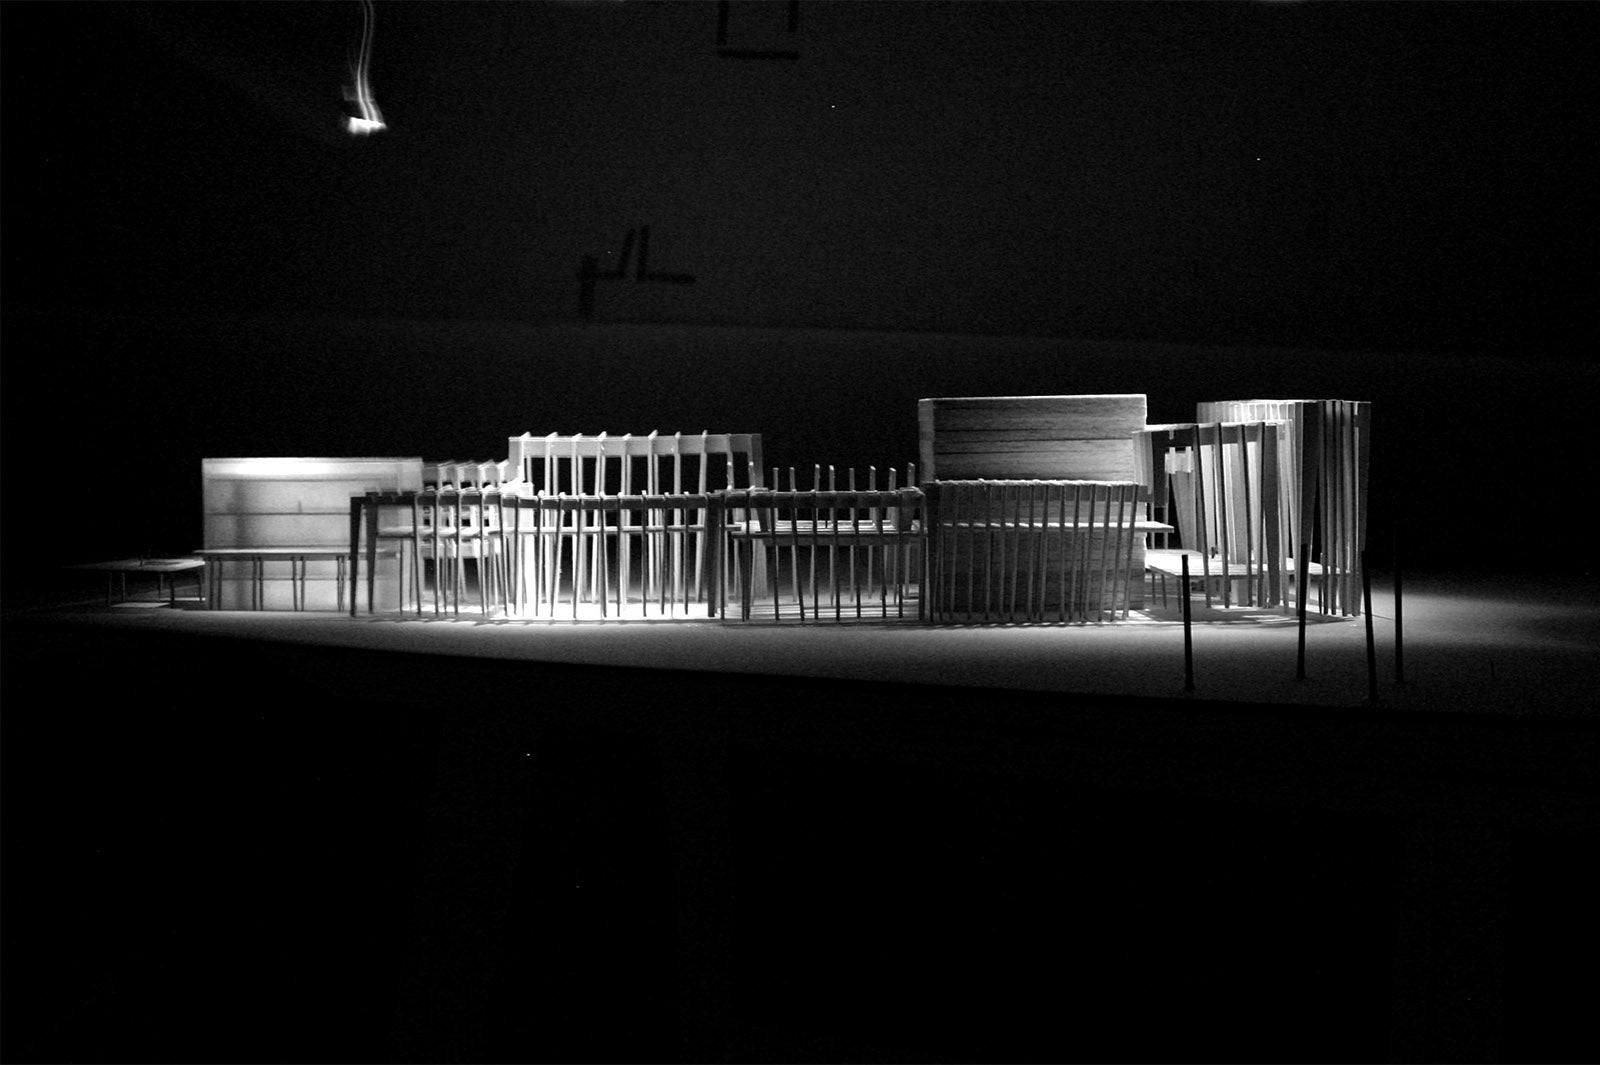 A photograph of the physical model lit from above in a dark room.